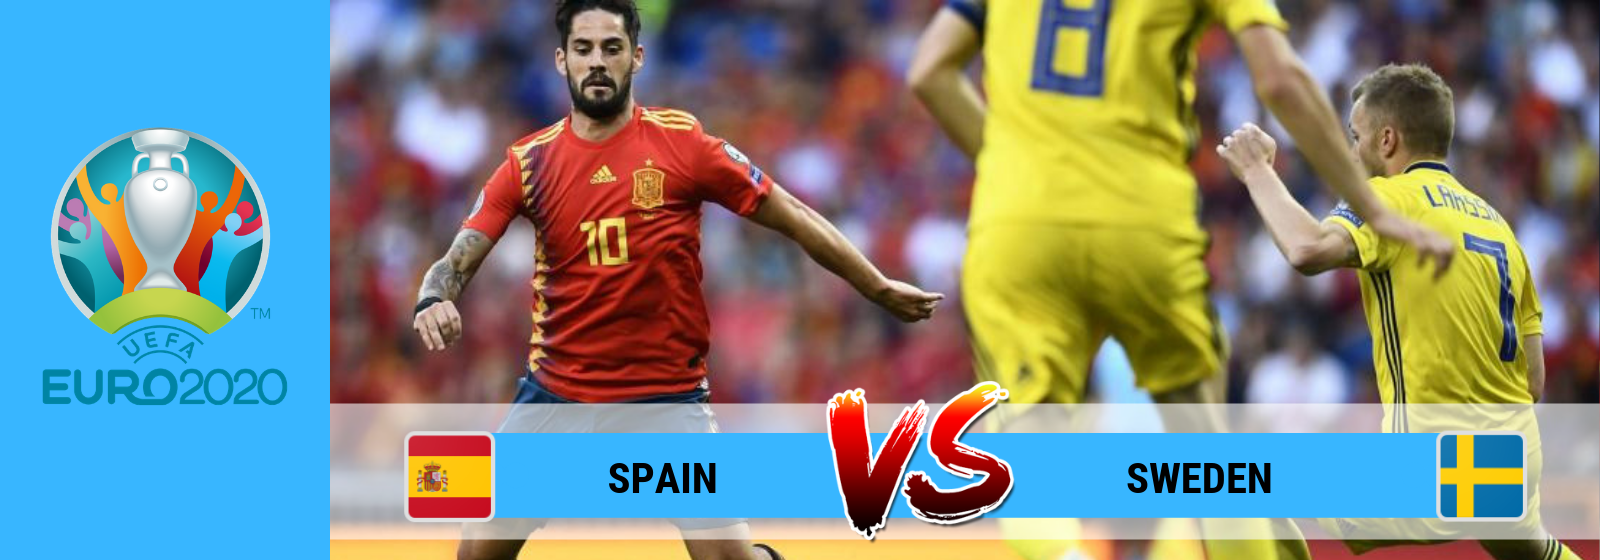 Spain vs Sweden: Watch FREE Online, Live Stream, Kick-off time, Predictions, Betting Tips, Odds